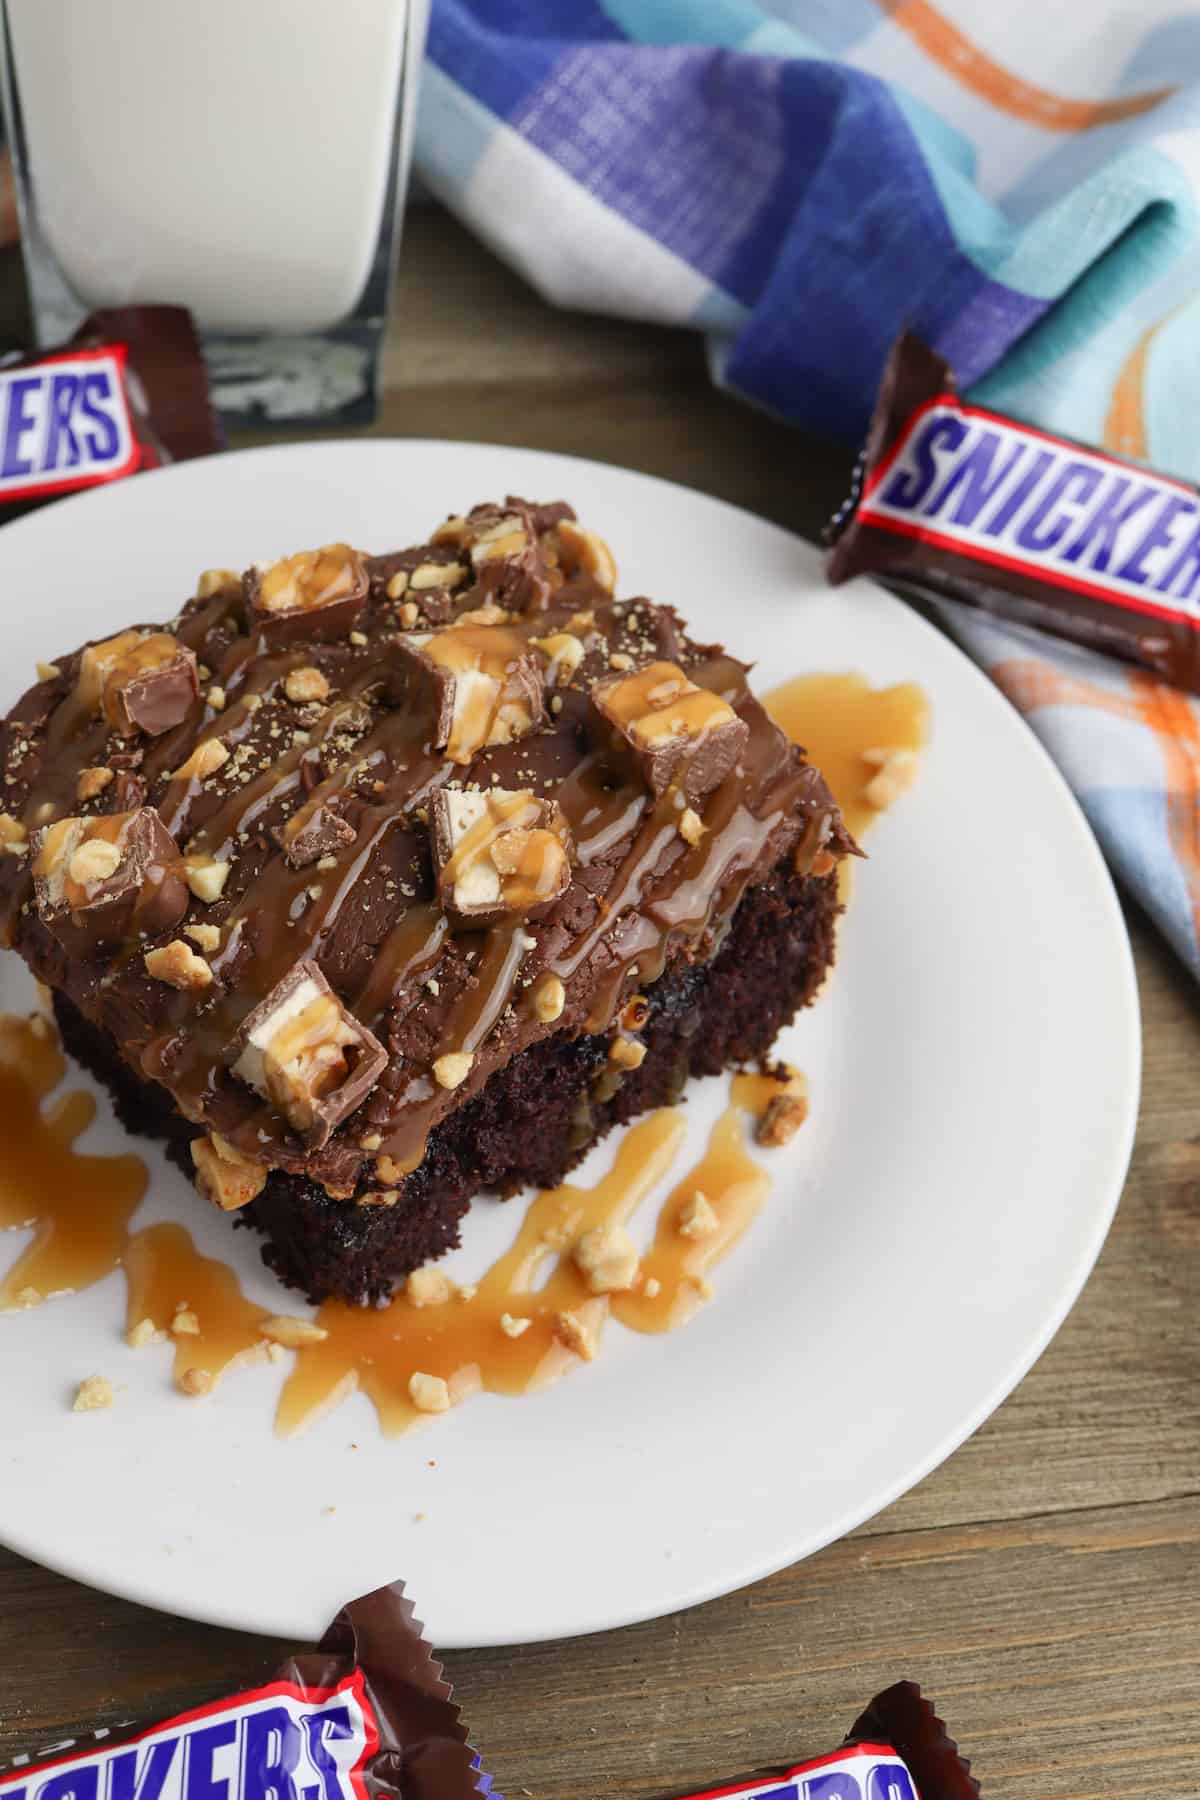 Slice of chocolate cake with frosting and chopped Snicker's bars.